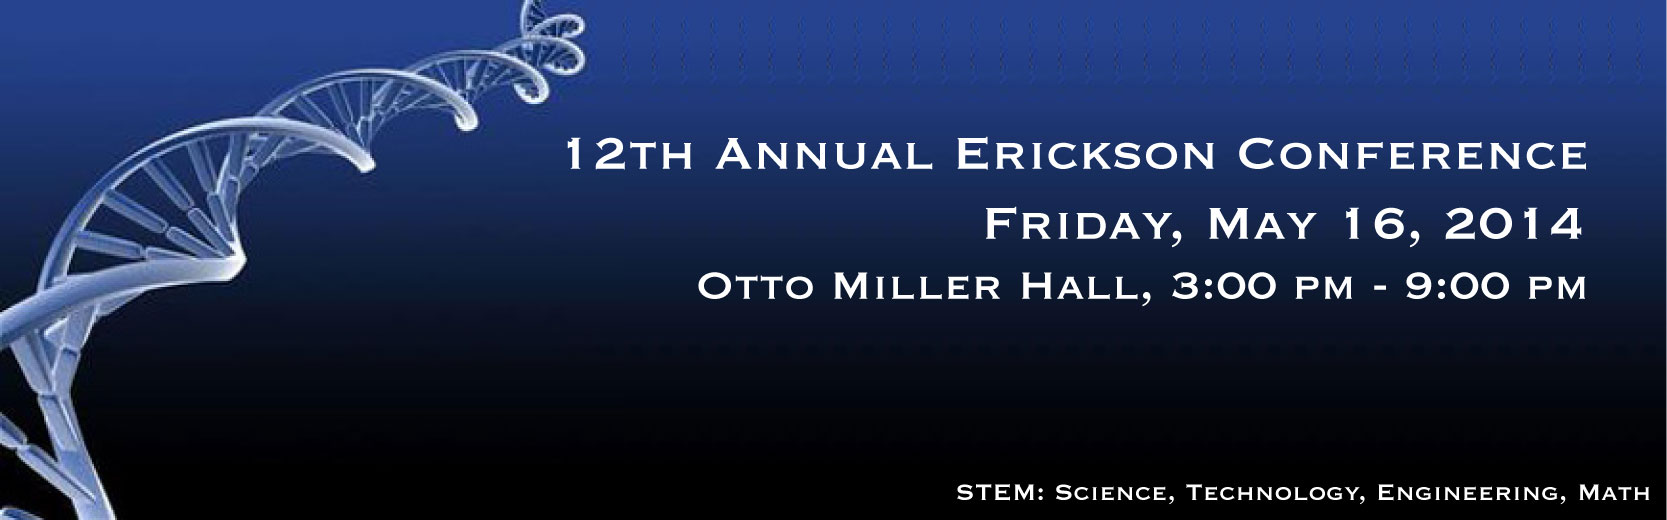 12th Annual Erickson Conference banner May 16, 2014